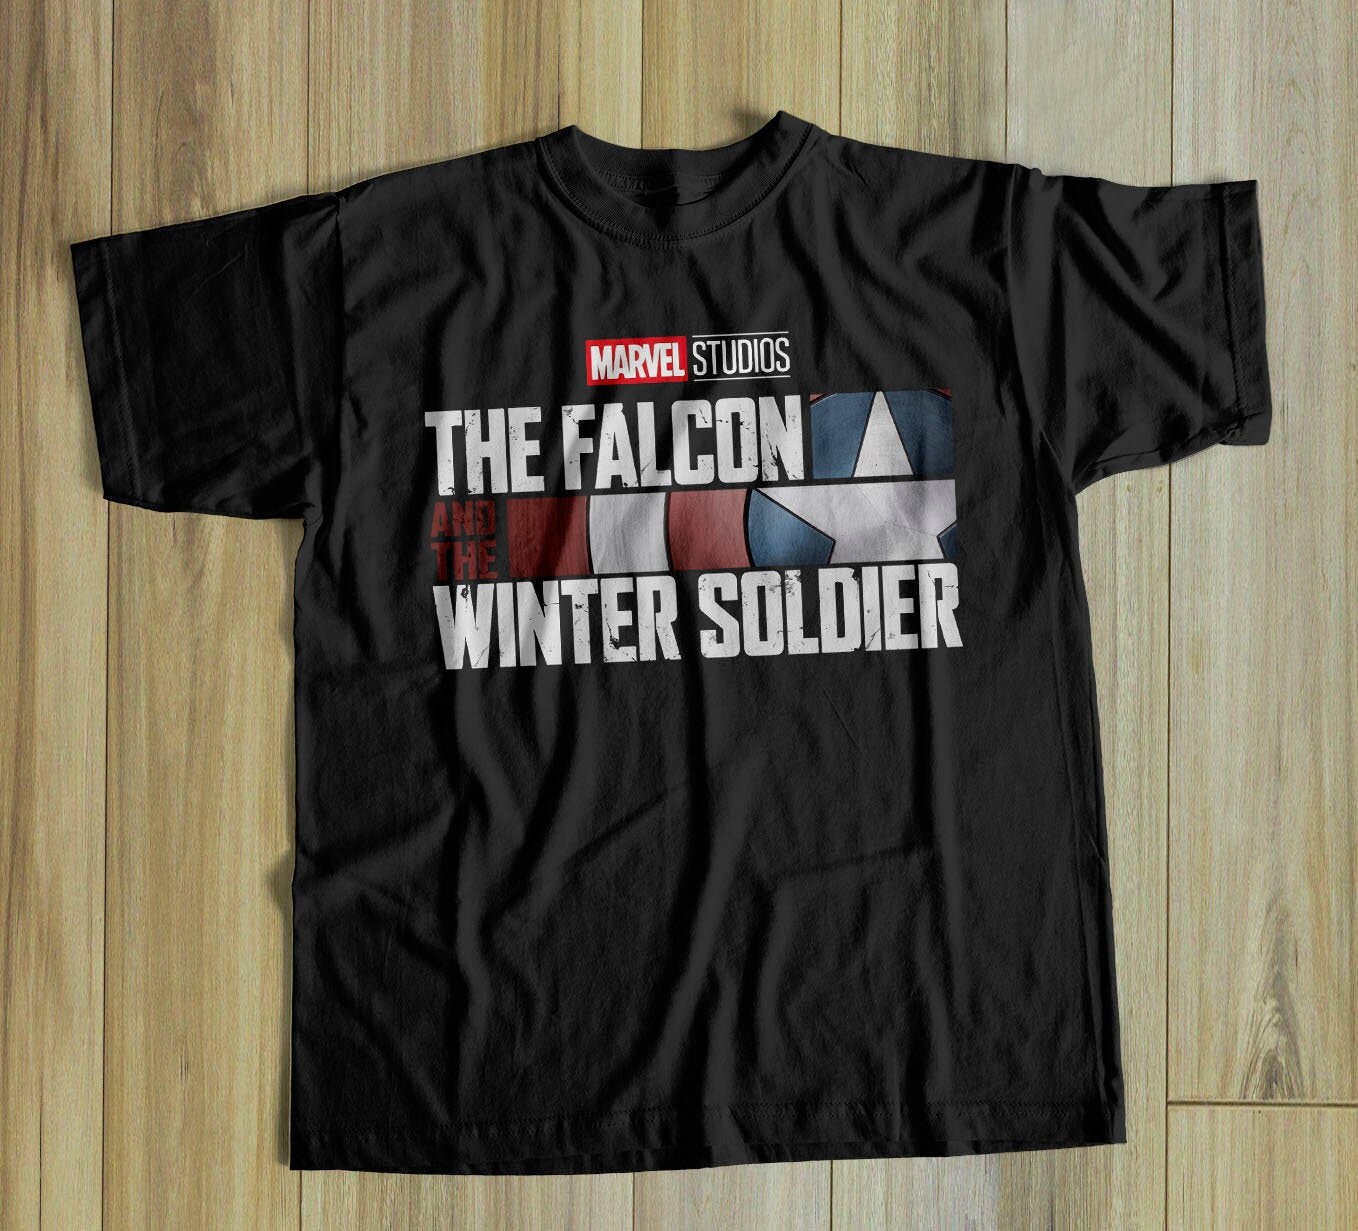 The-falcon-and-the-winter-soldier-shirt-avengers-shirt-falcon-shirt-winter-soldier-shirt-superhero-shirt-comics-shirt-avengers-t-shirt